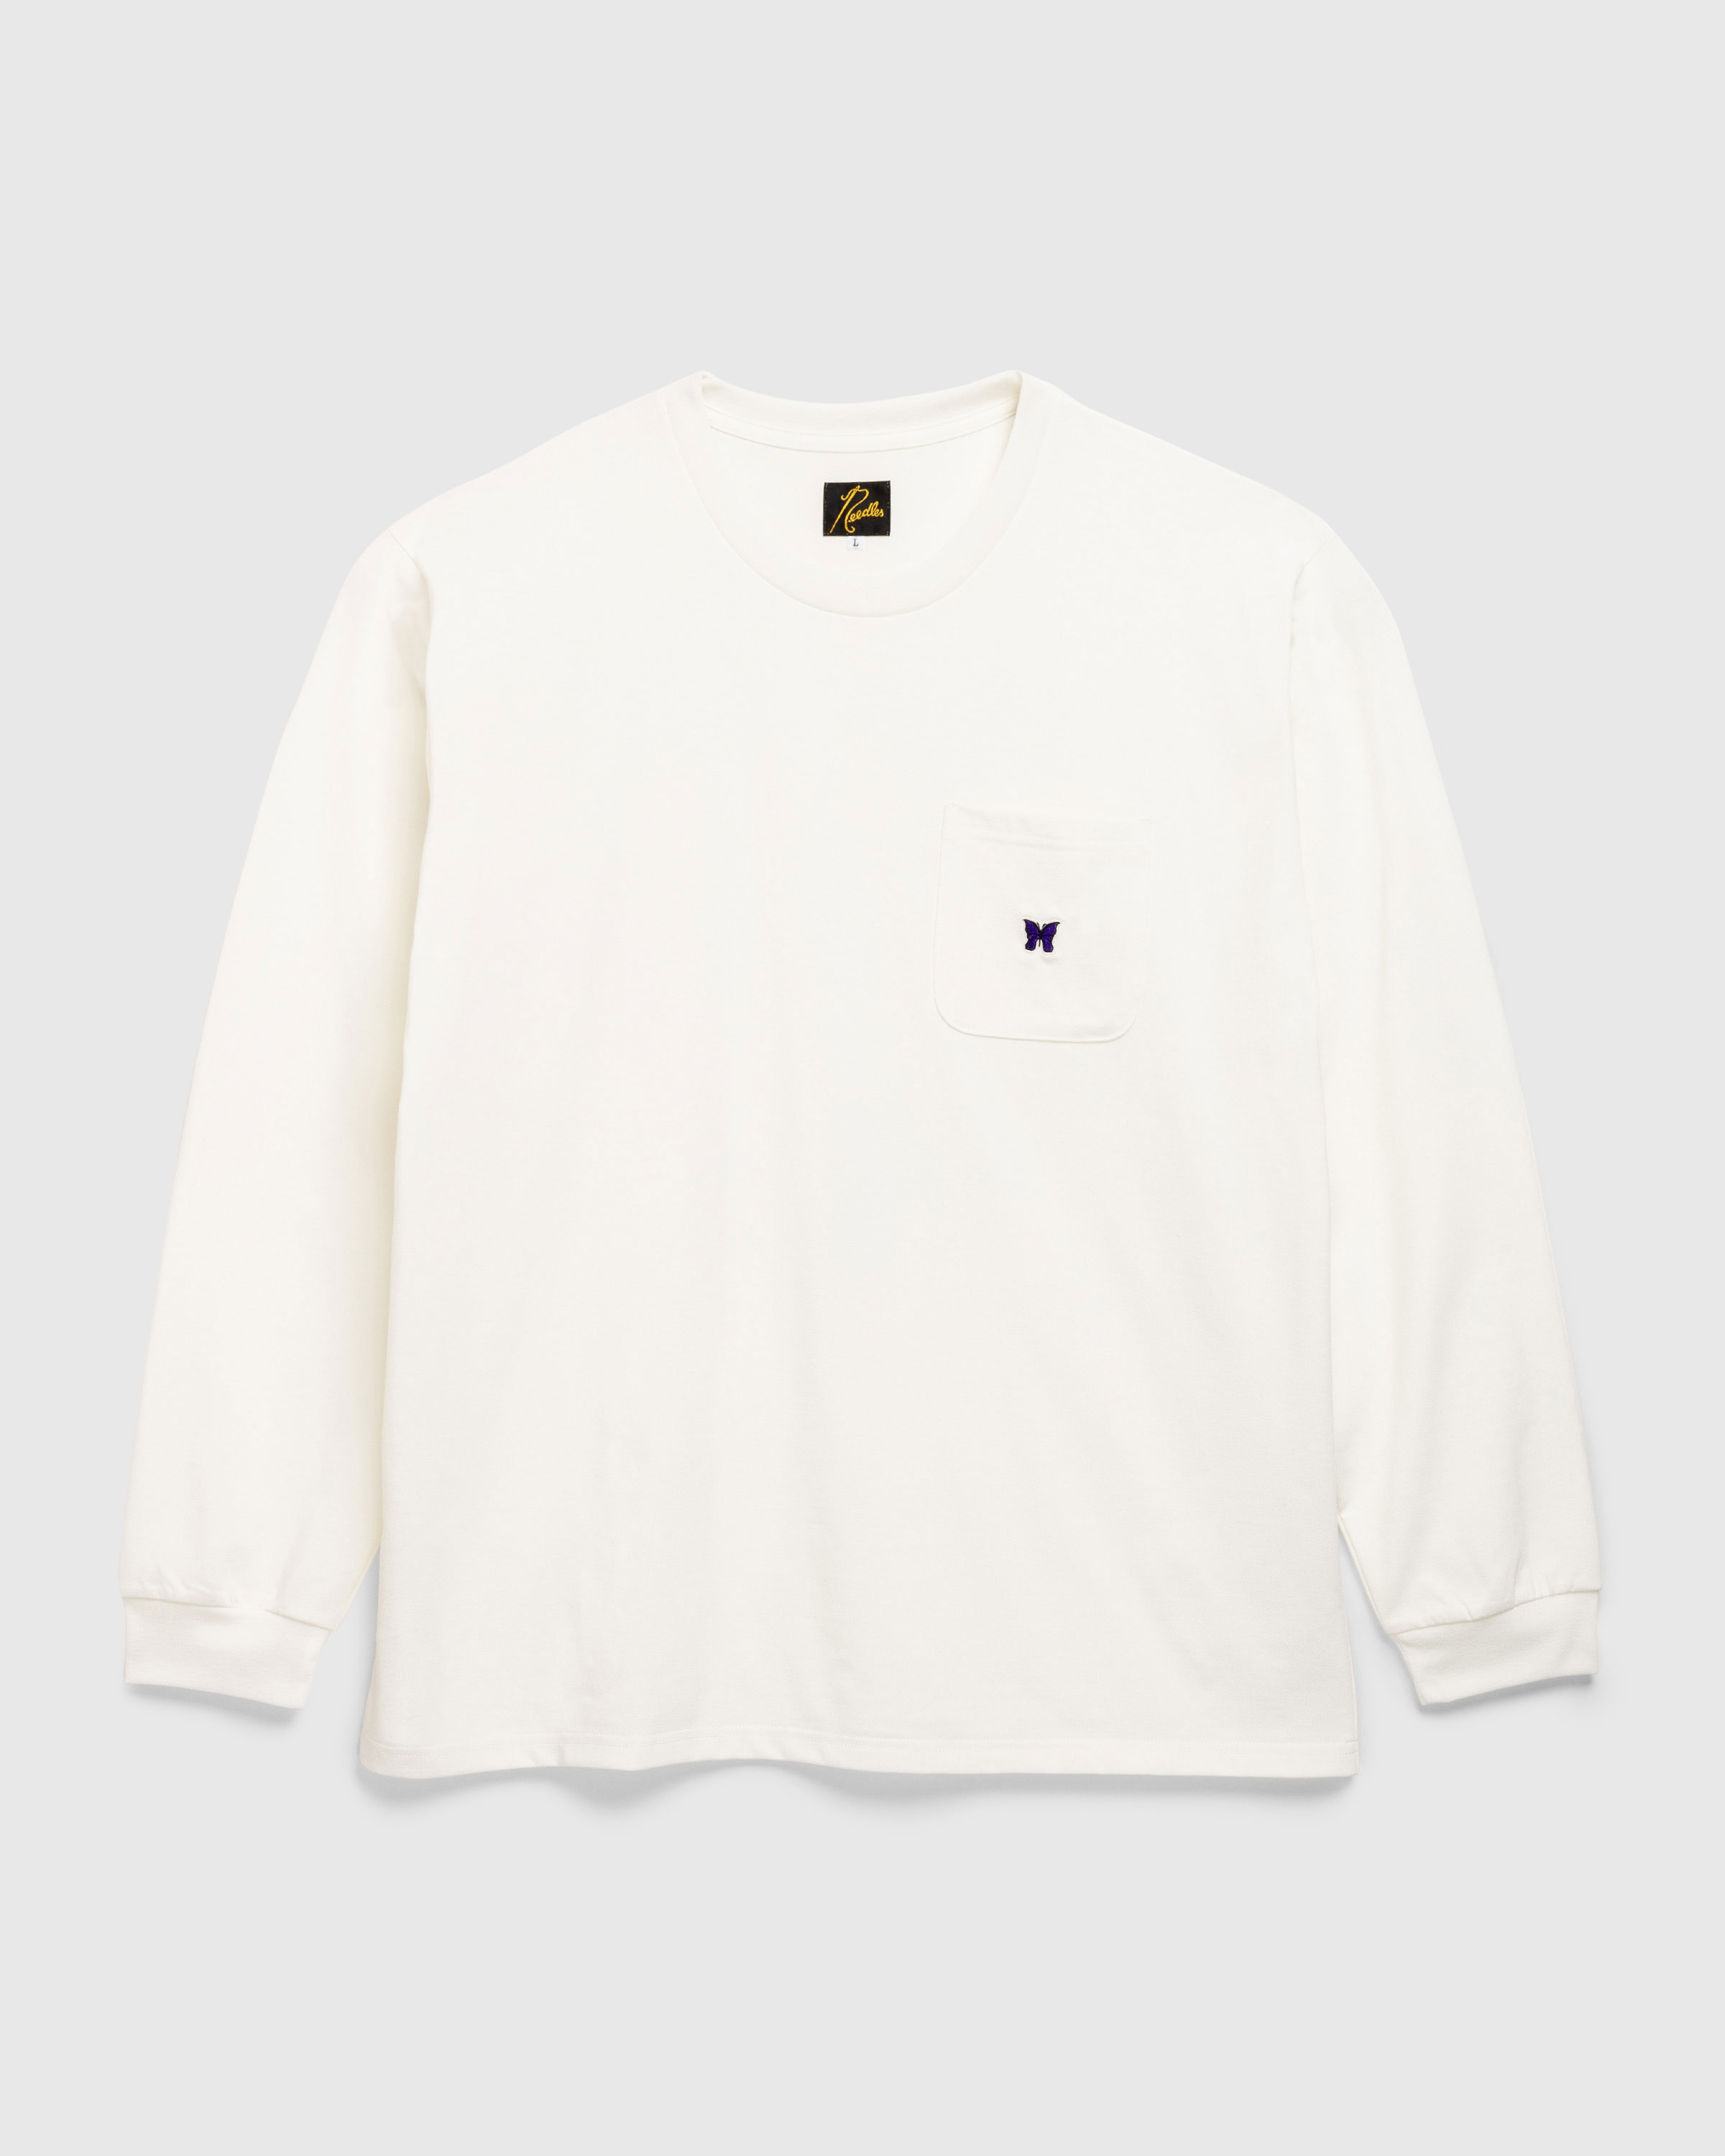 Needles – L/S Crew Neck Tee Poly Jersey White - Longsleeves - White - Image 1